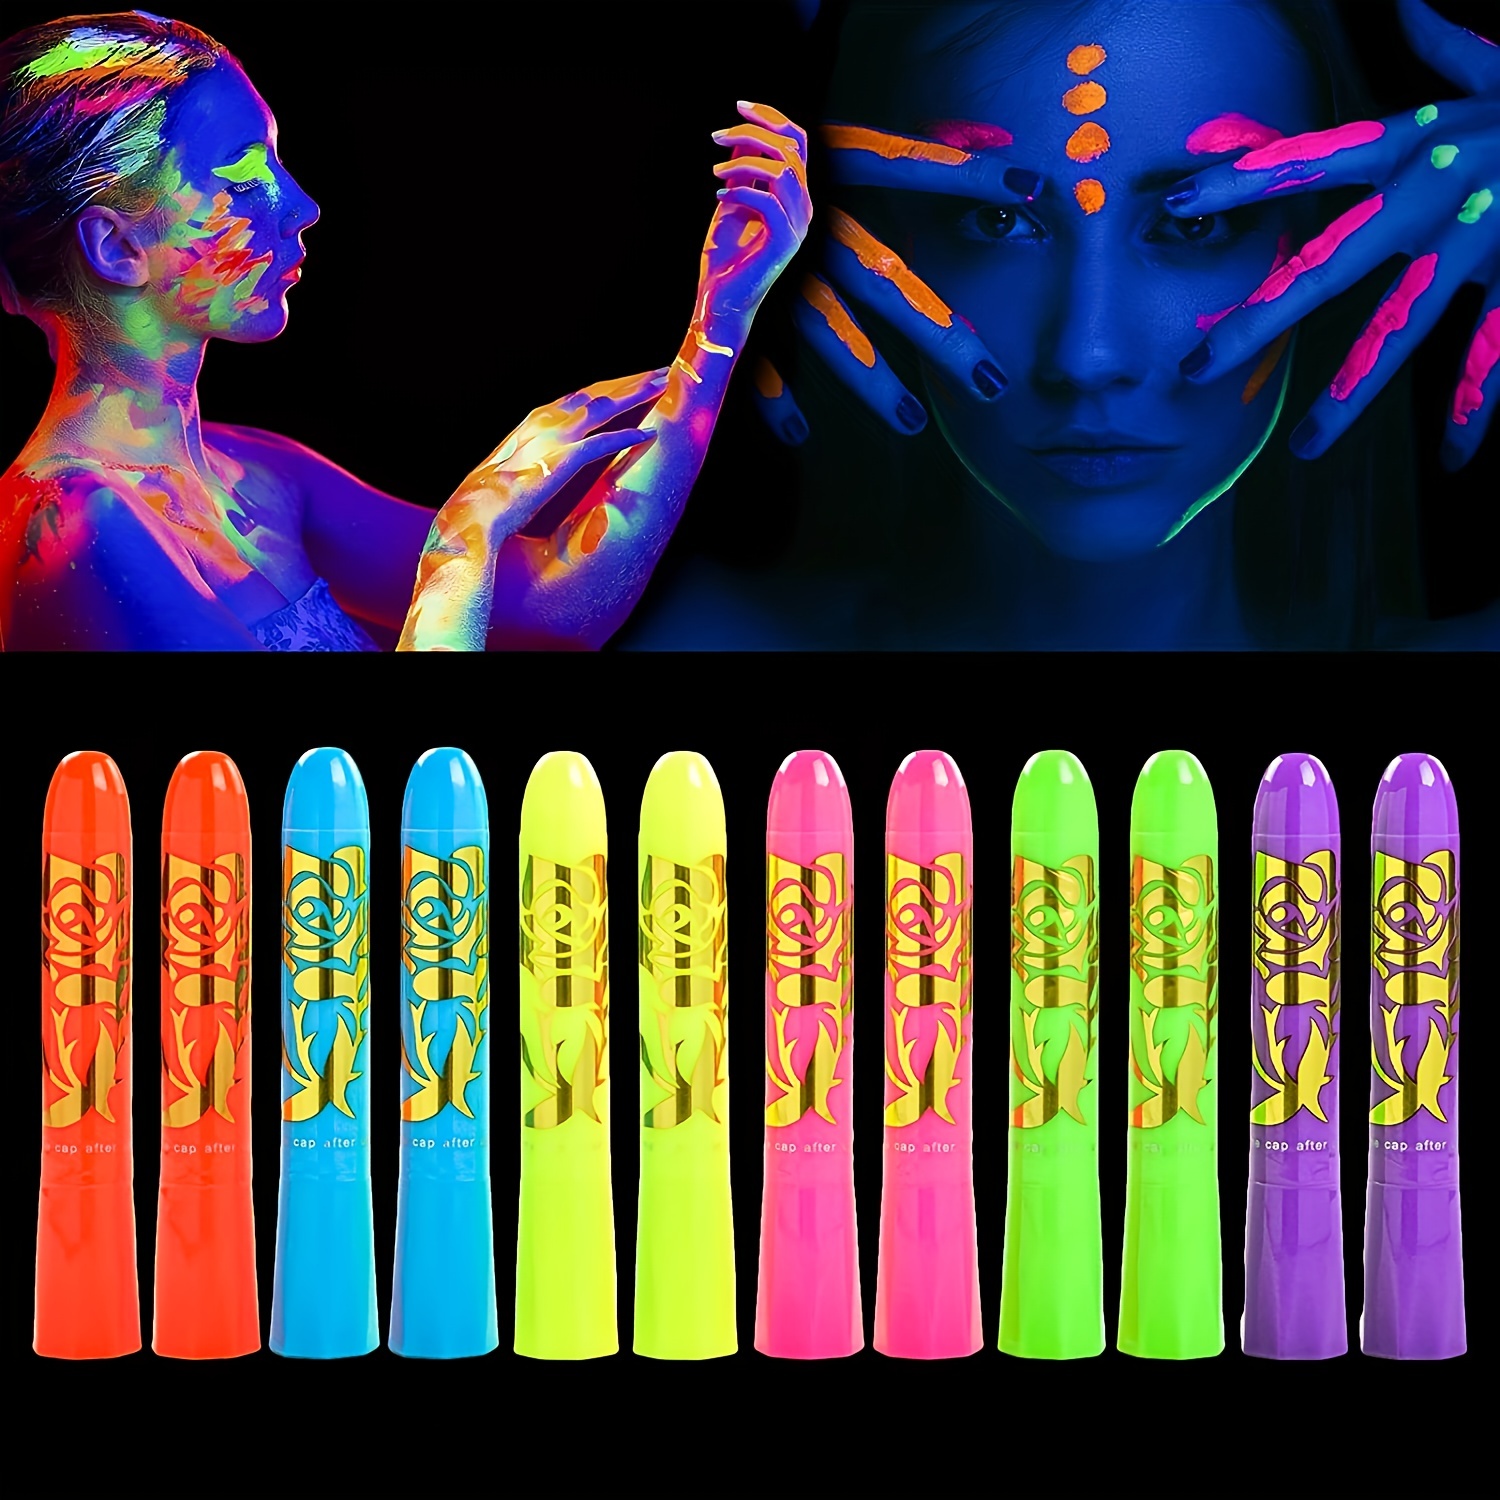 

12 Pcs Glow In The Dark Body Face Paint Neon Glow In The Black Light Uv Fluorescent Crayons Paint Sticks Makeup Kit For Adults Halloween Makeup Masquerade Mardi Gras Blacklight Birthday Party